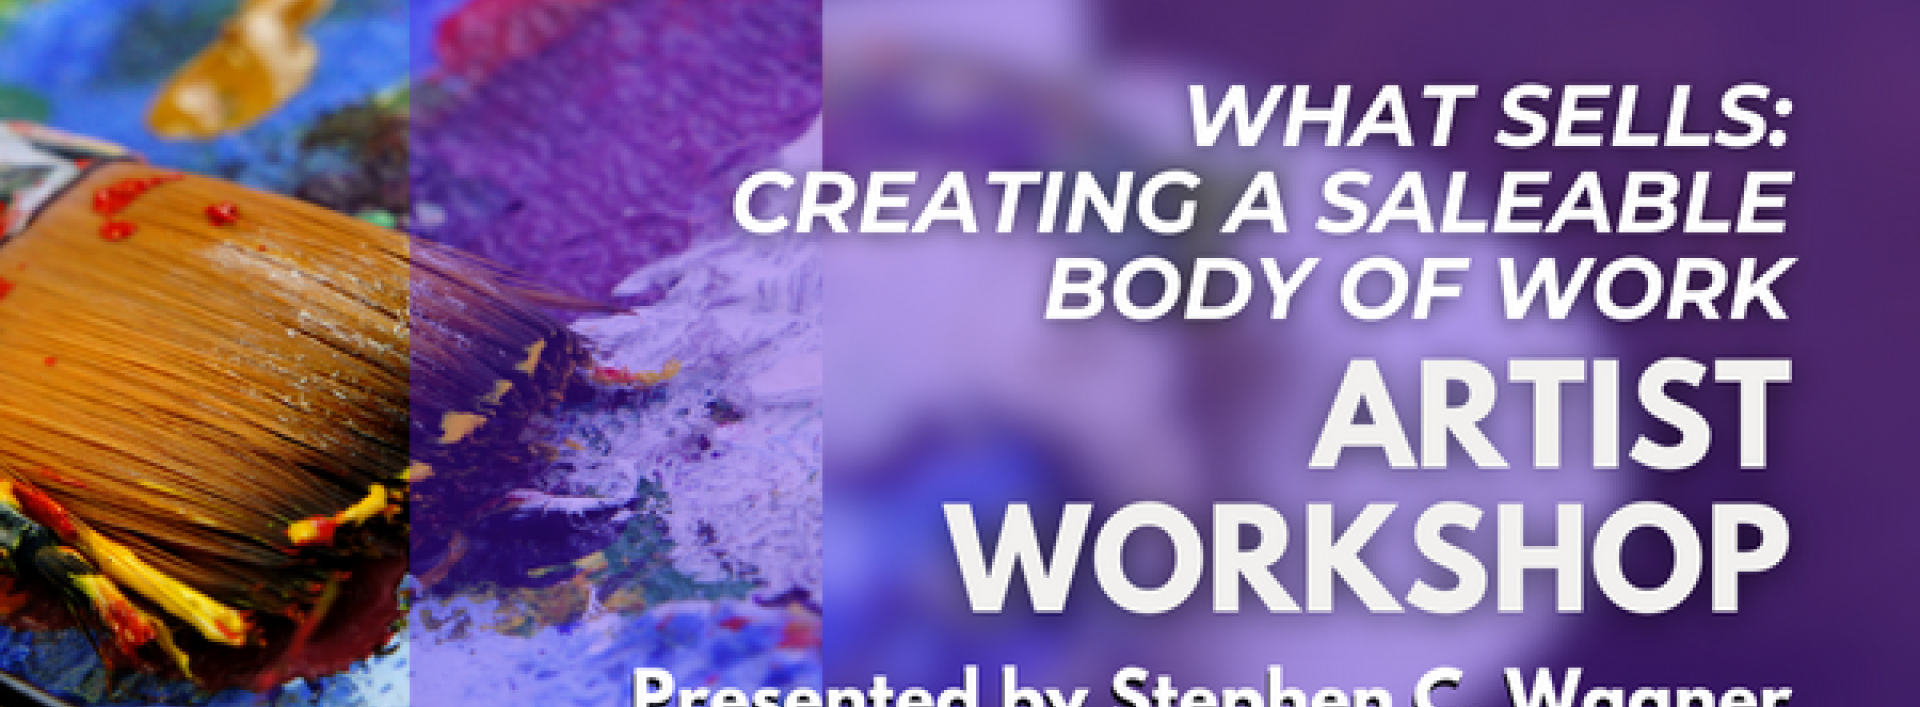 event graphic for the What Sells artist workshop